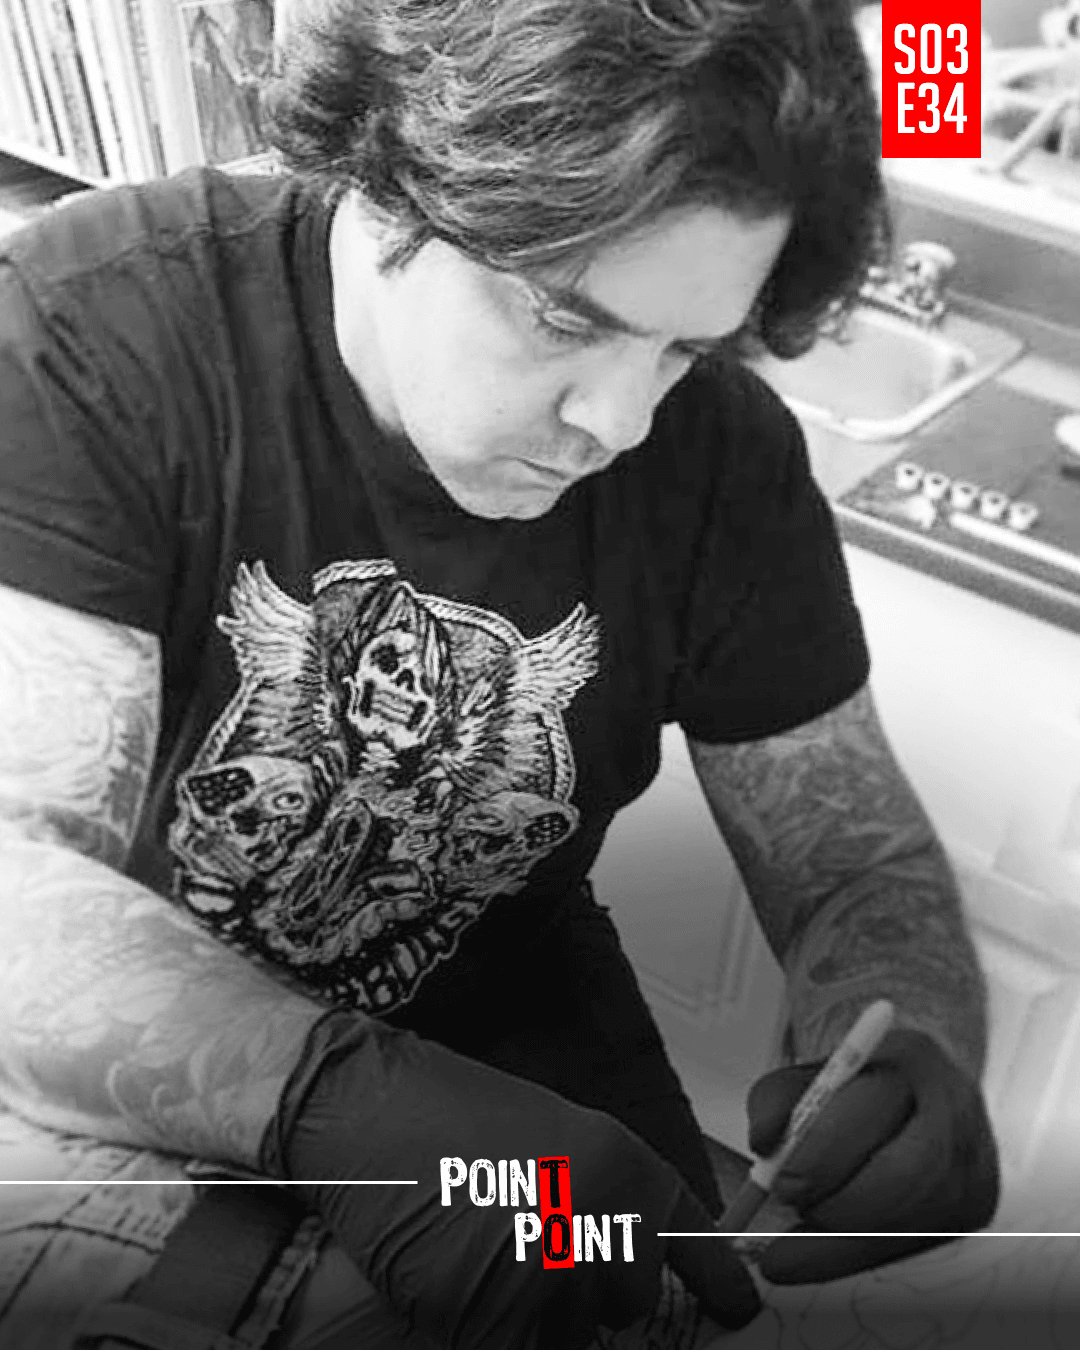 Mike Young Talks Machine Building, Tattooing With His Son, and His Bonsai Passion...